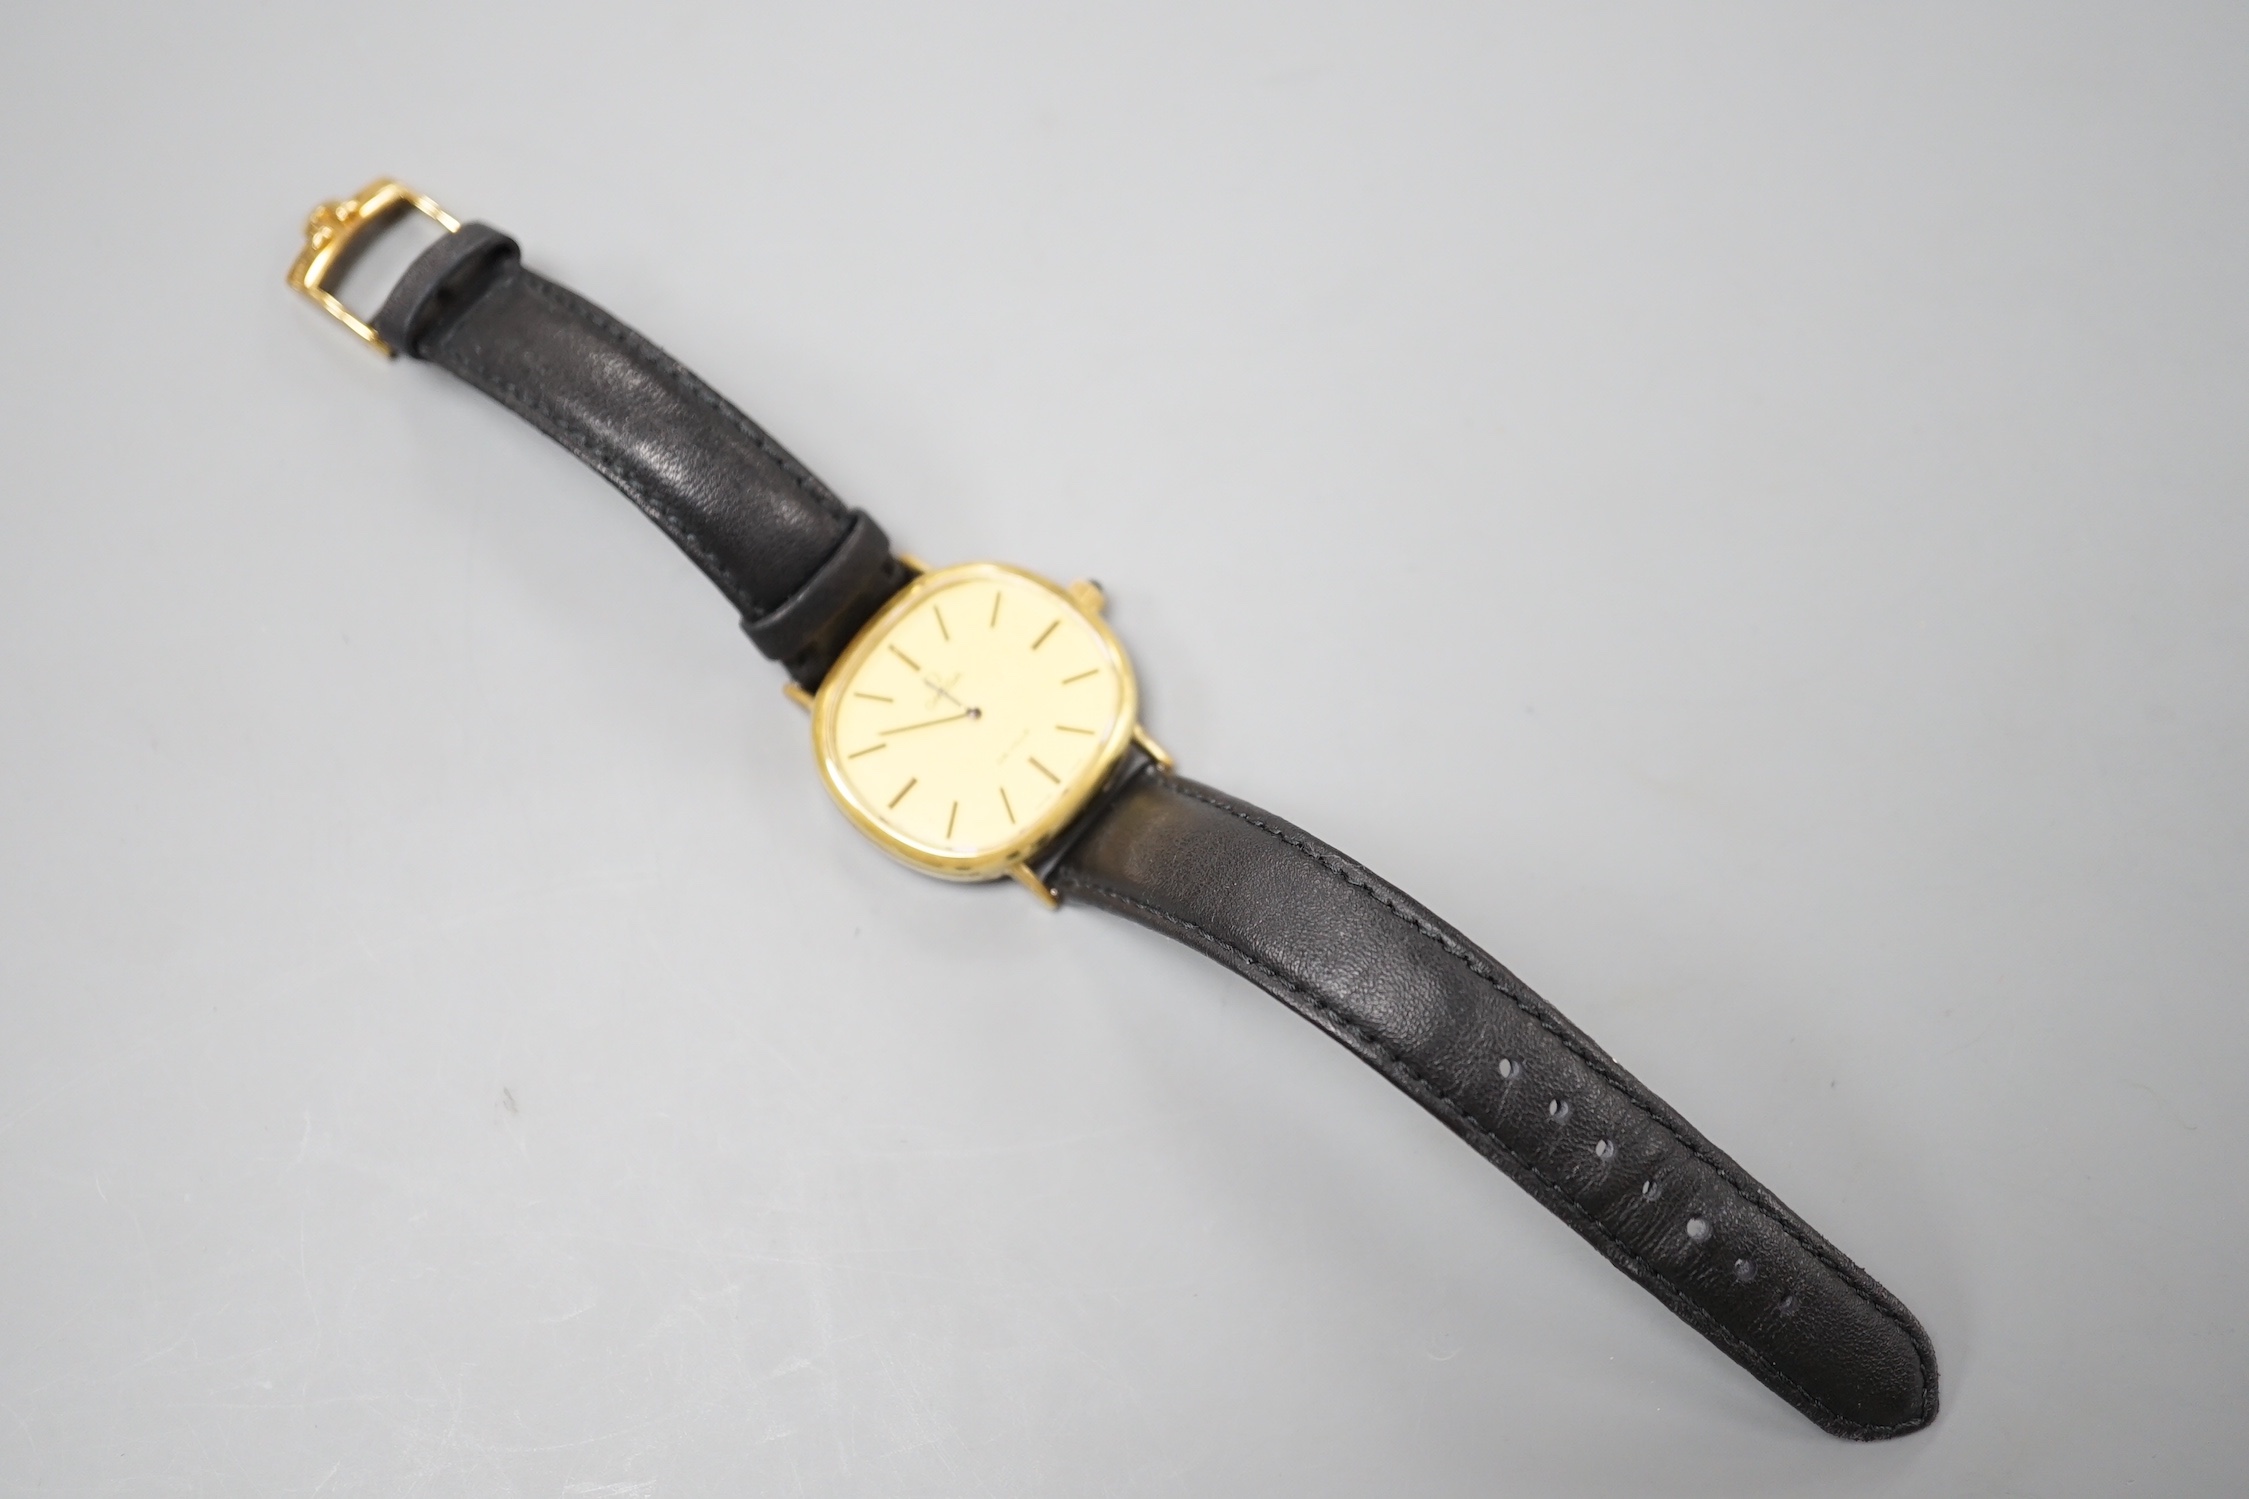 A gentleman's gold plated Omega de Ville manual wind wrist watch, on a black leather strap, with Omega buckle, case diameter 33mm, no box or papers.